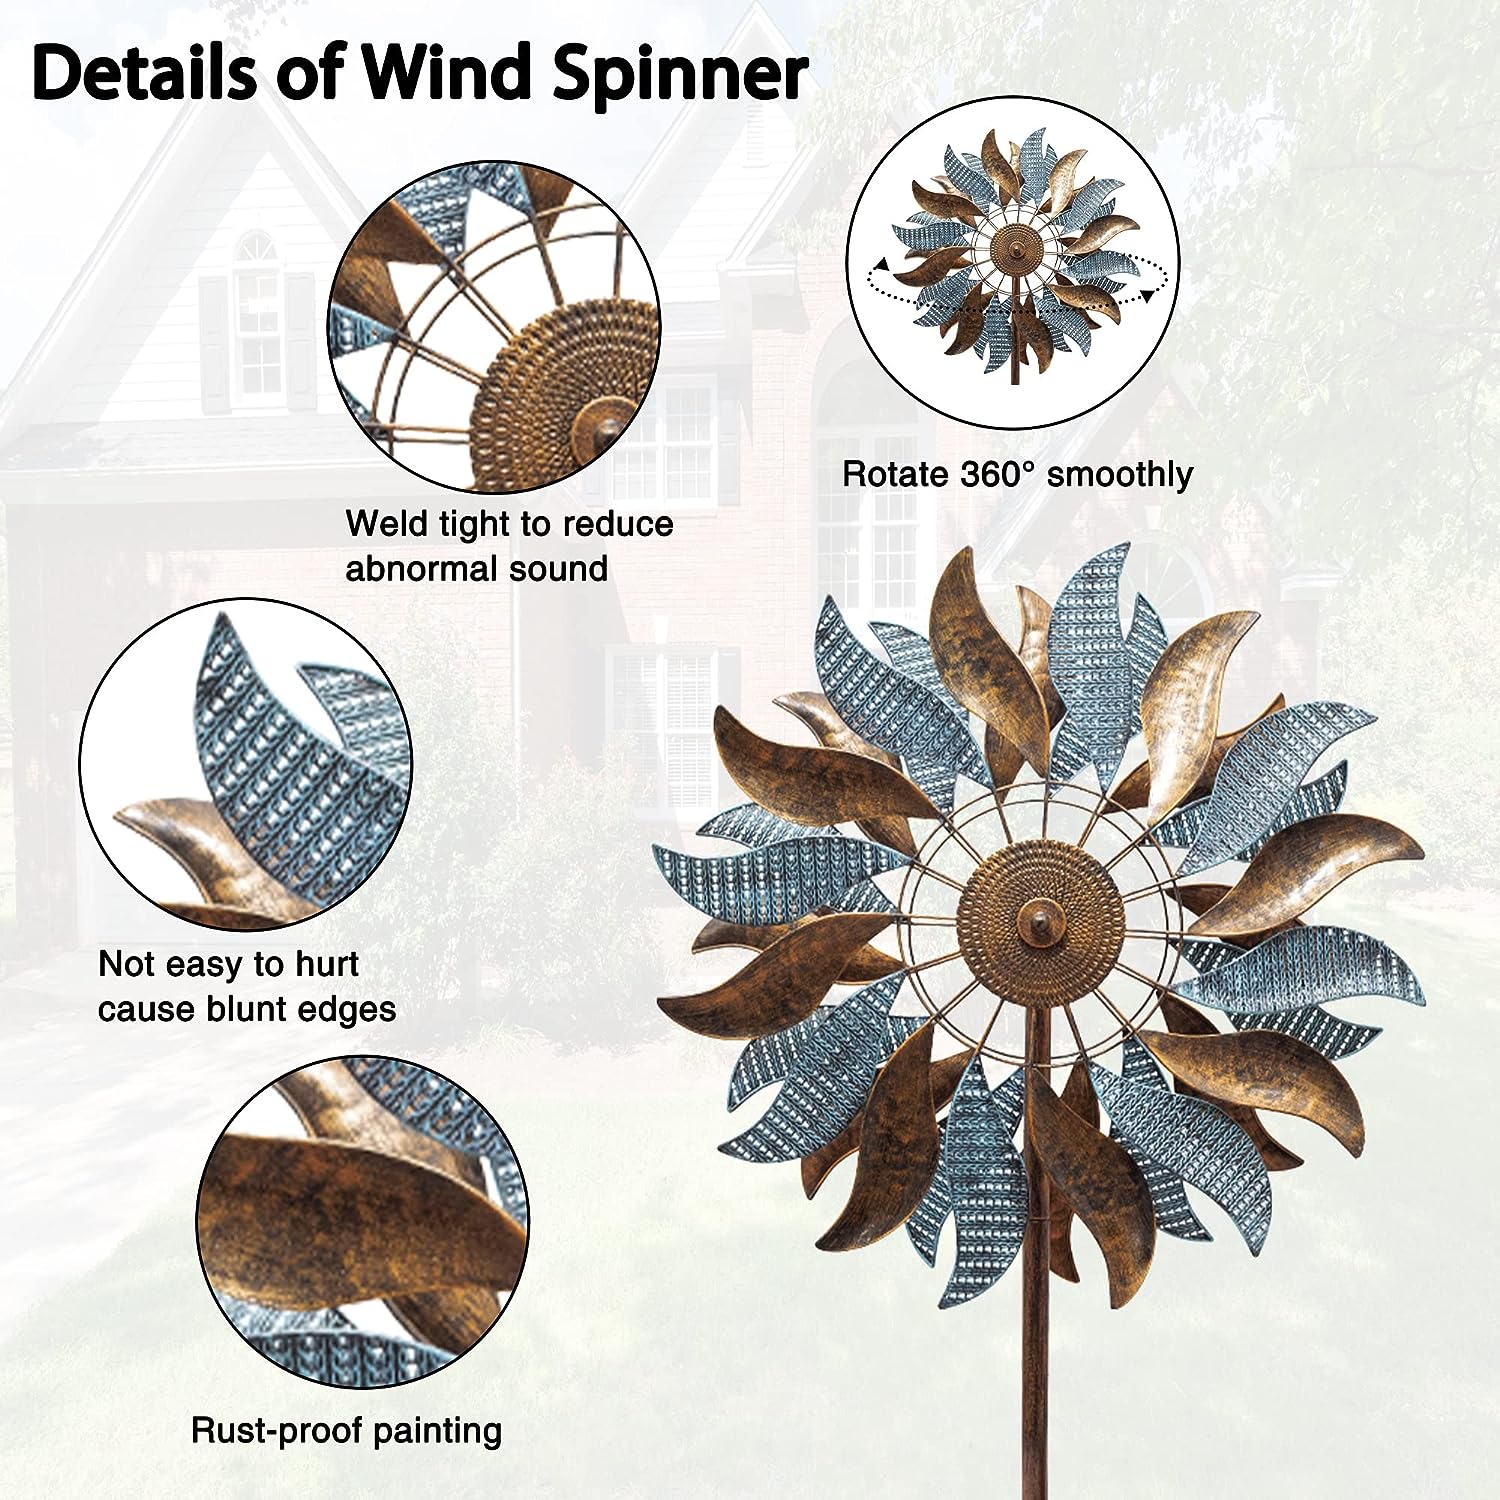 84 Inch Garden Spinners Review: Large Metal Wind Spinner for Outdoor Decor